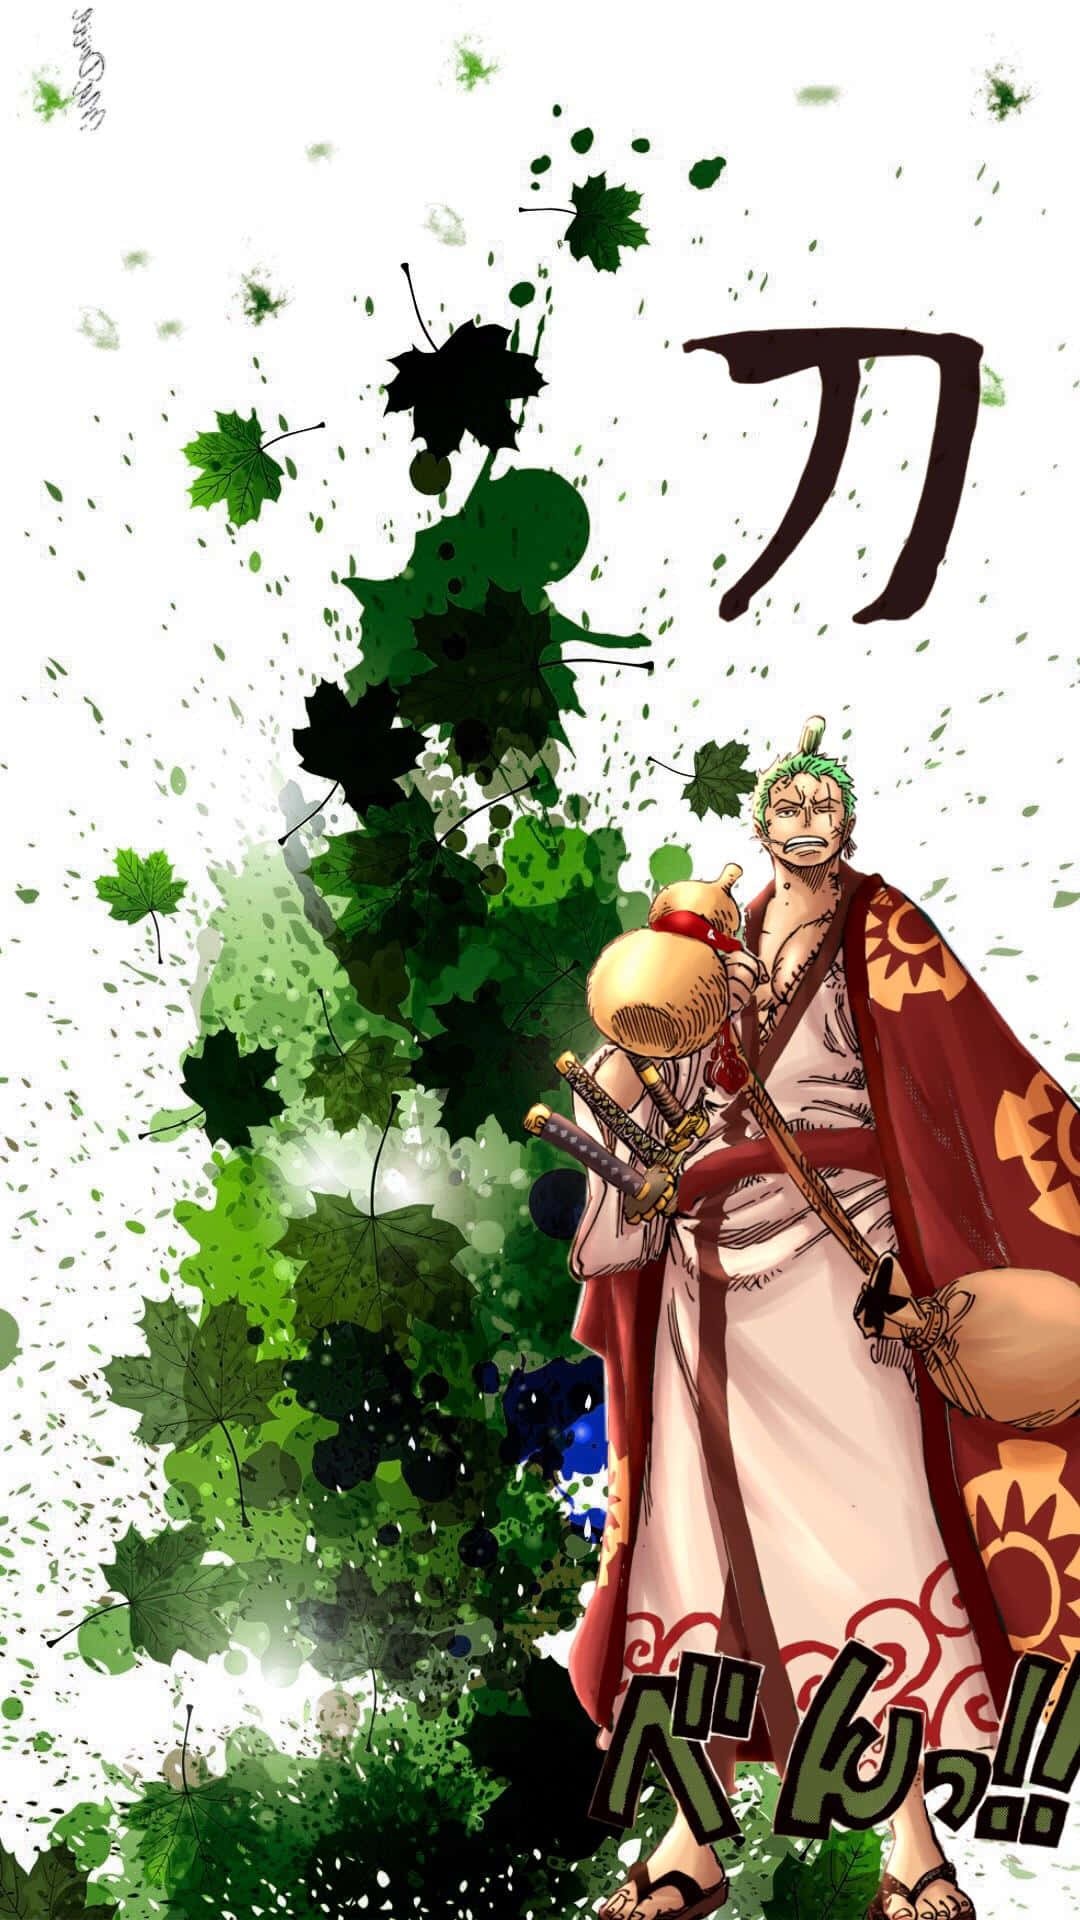 The Mighty Zoro in Battle Stance